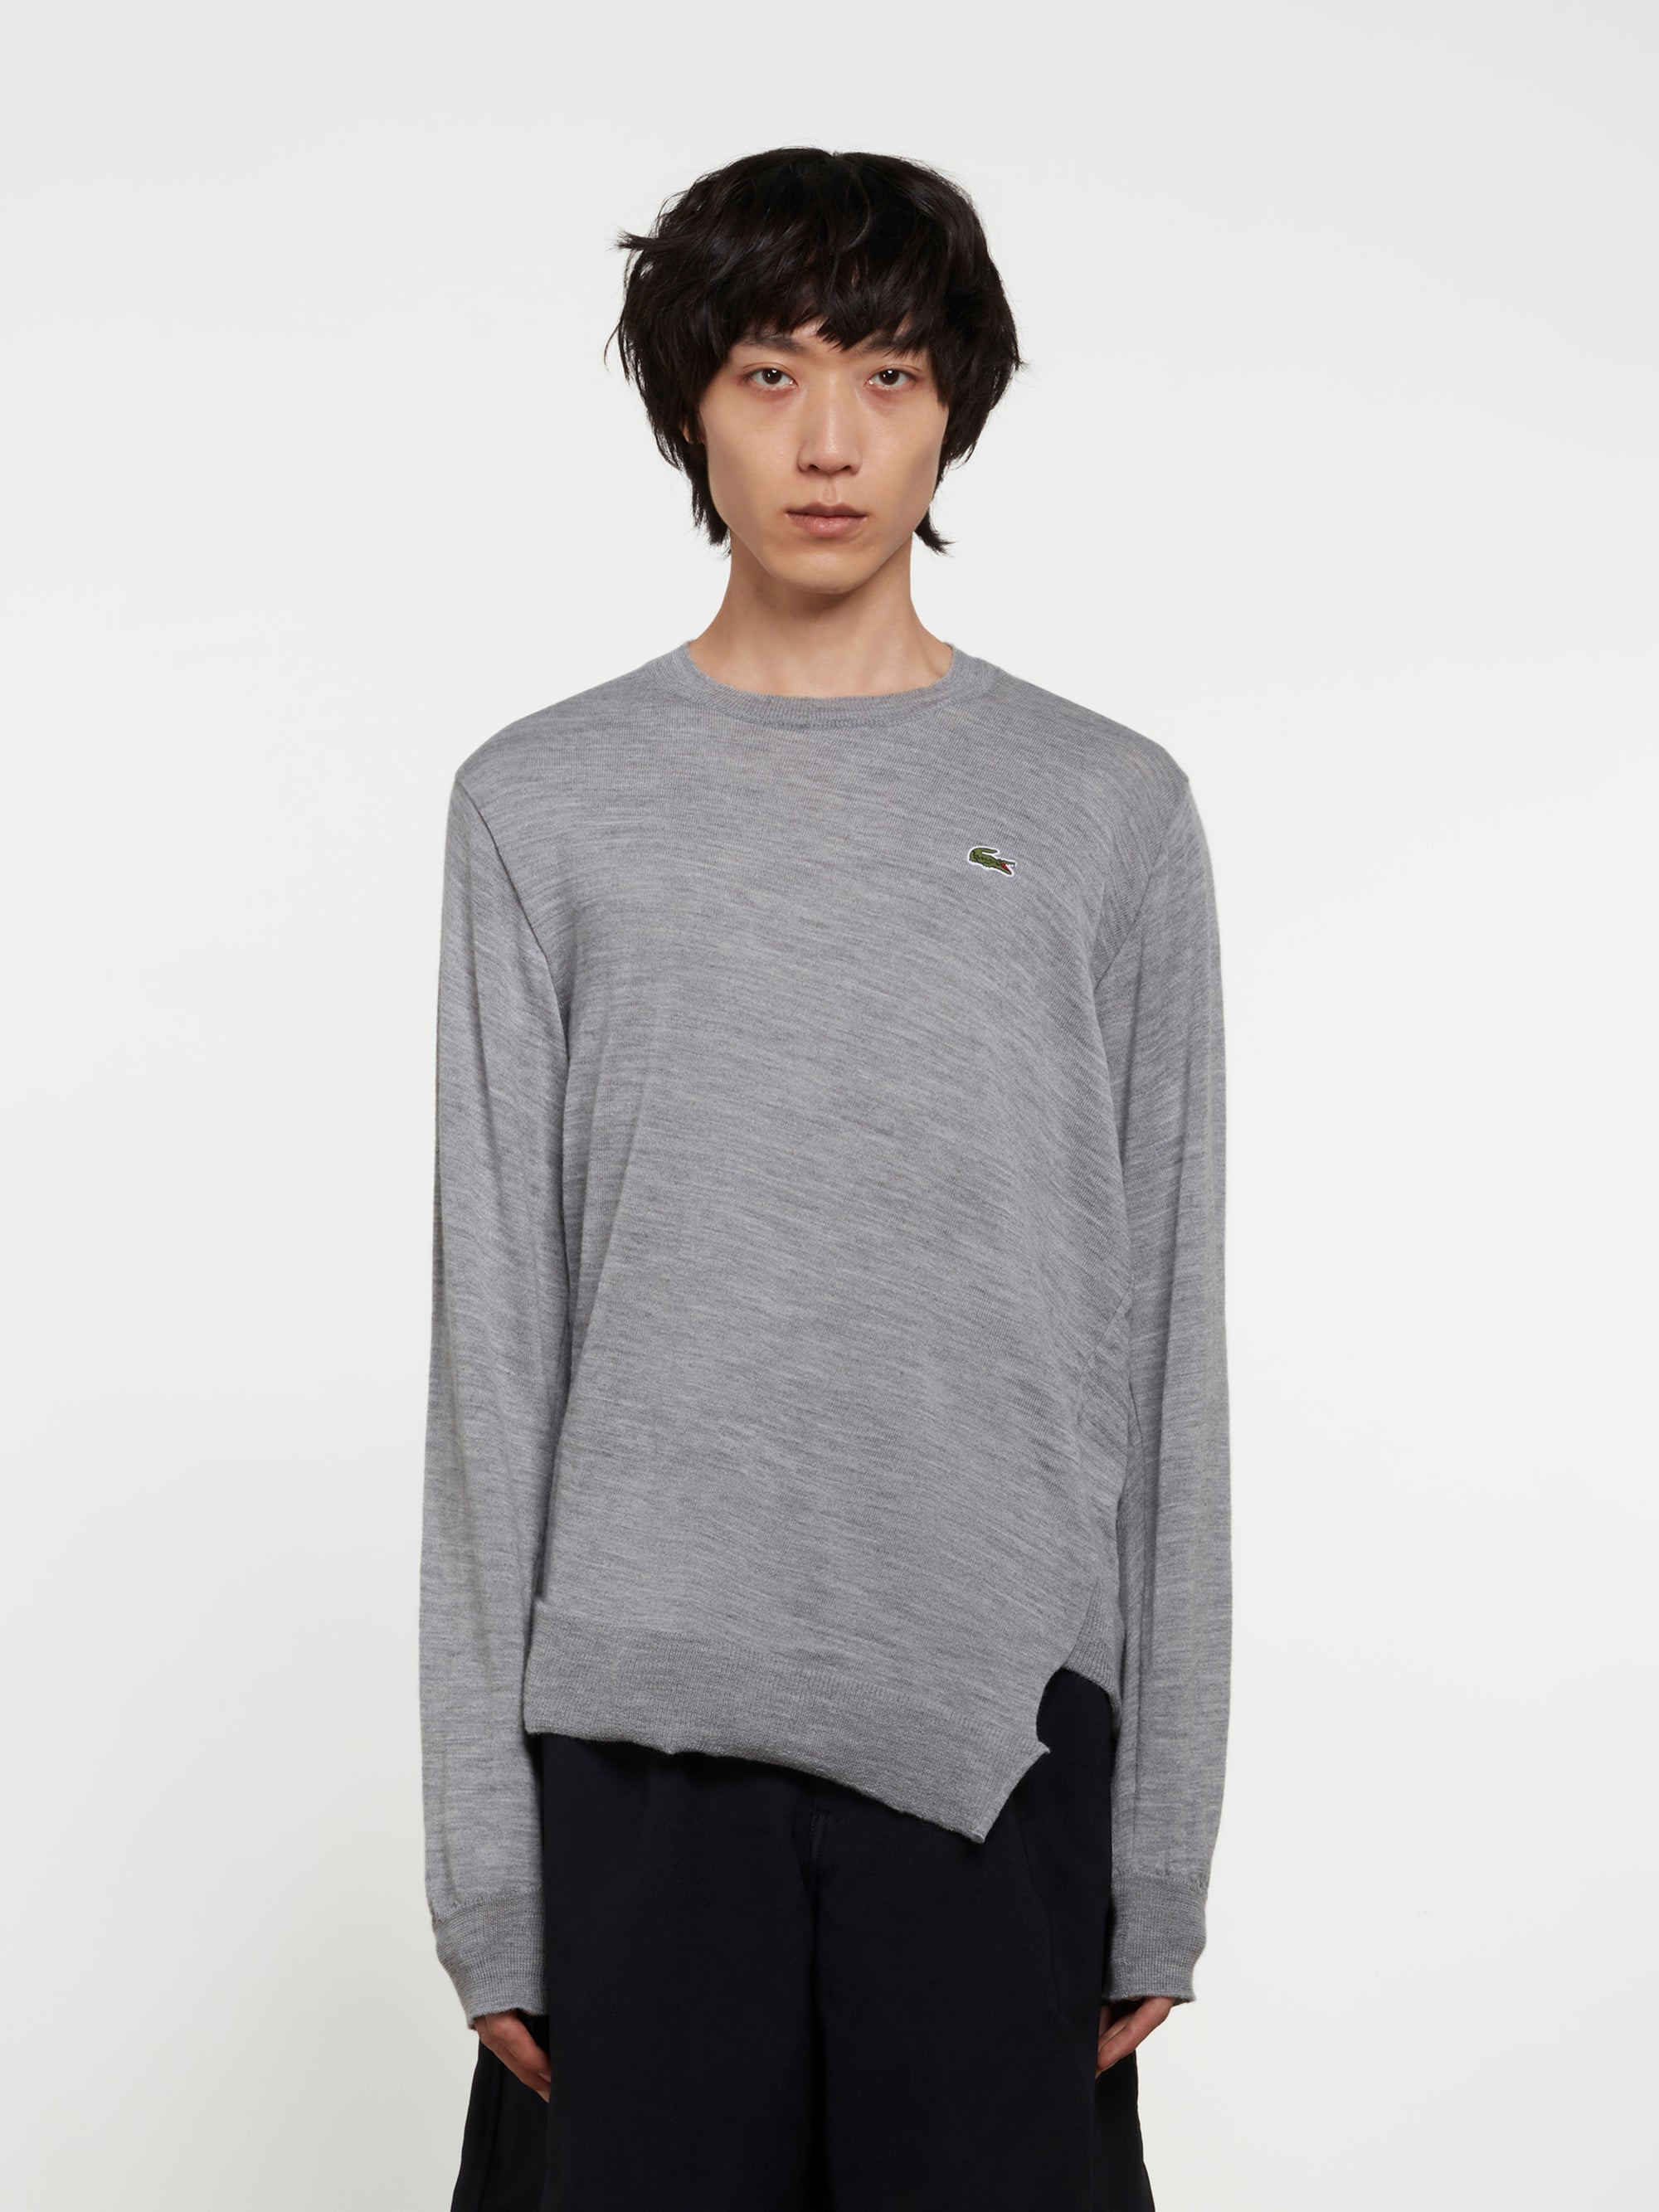 CDG Shirt - Lacoste Men’s Knit Sweater - (Grey) view 1